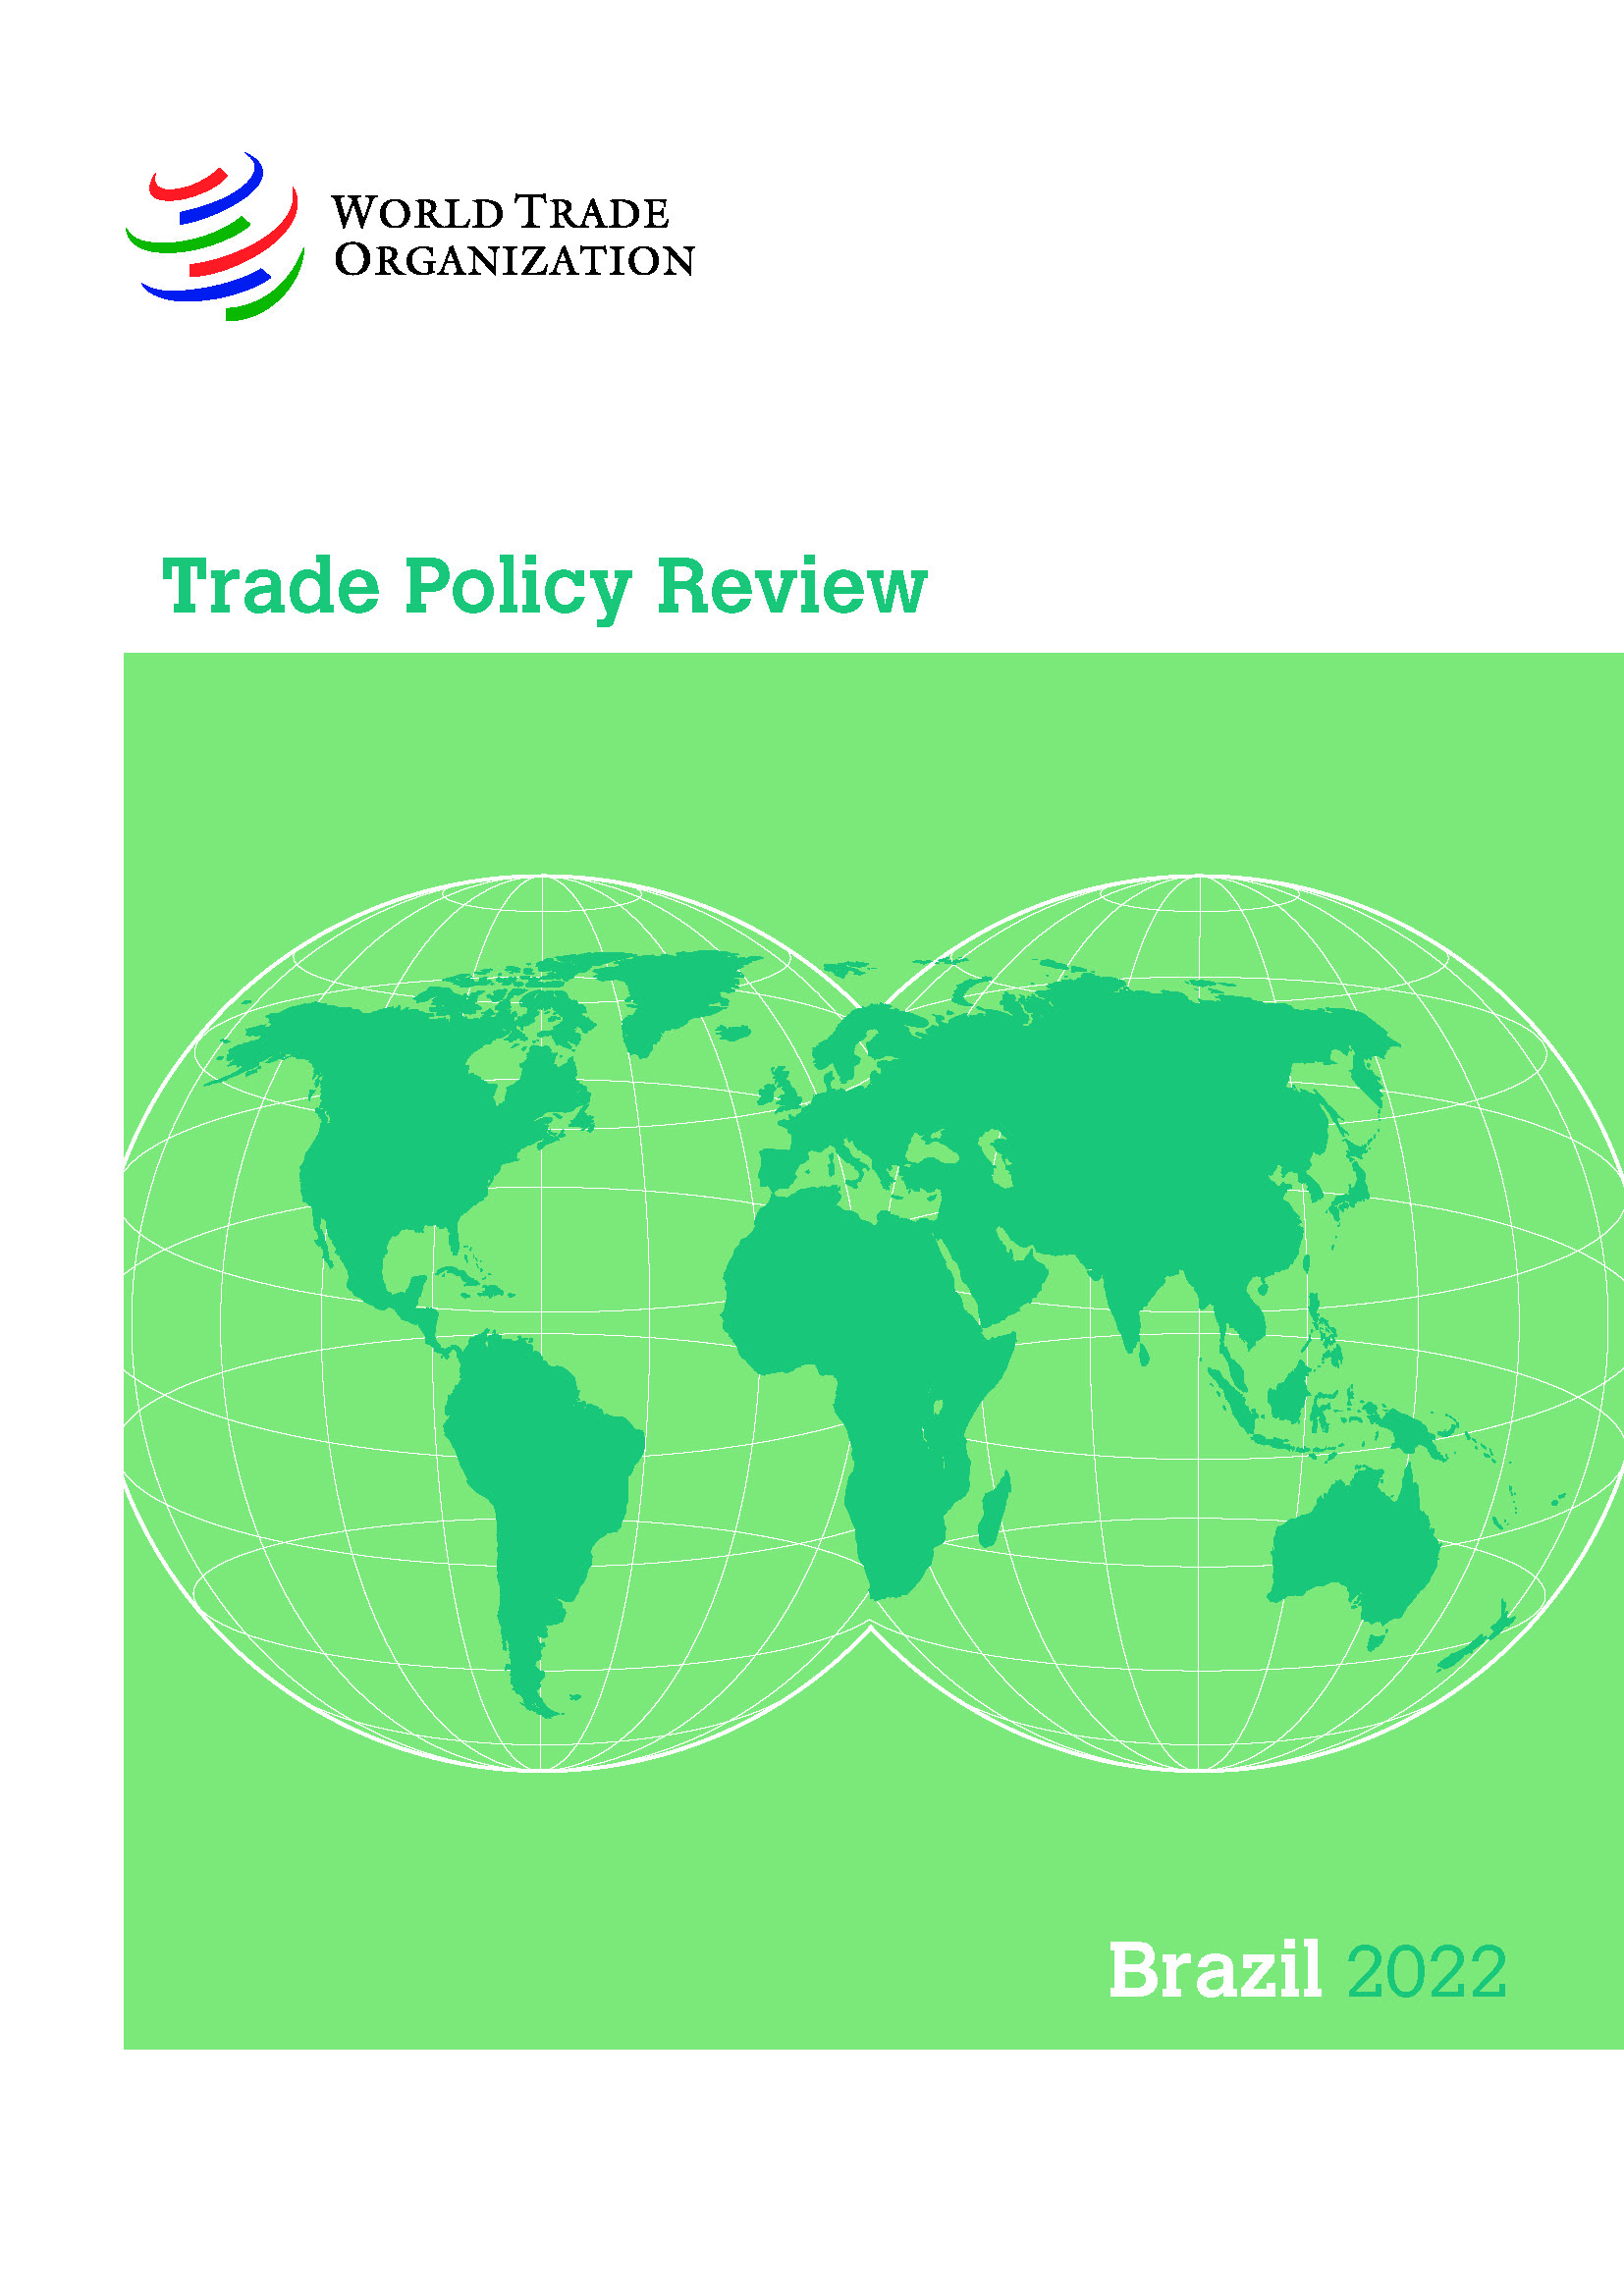 image of Concluding Remarks by the Chairperson of the Trade Policy Review Body, H.E. Mr Ángel Villalobos Rodríguez of Mexico, at the Trade Policy Review of Brazil, 23 and 25 November 2022.